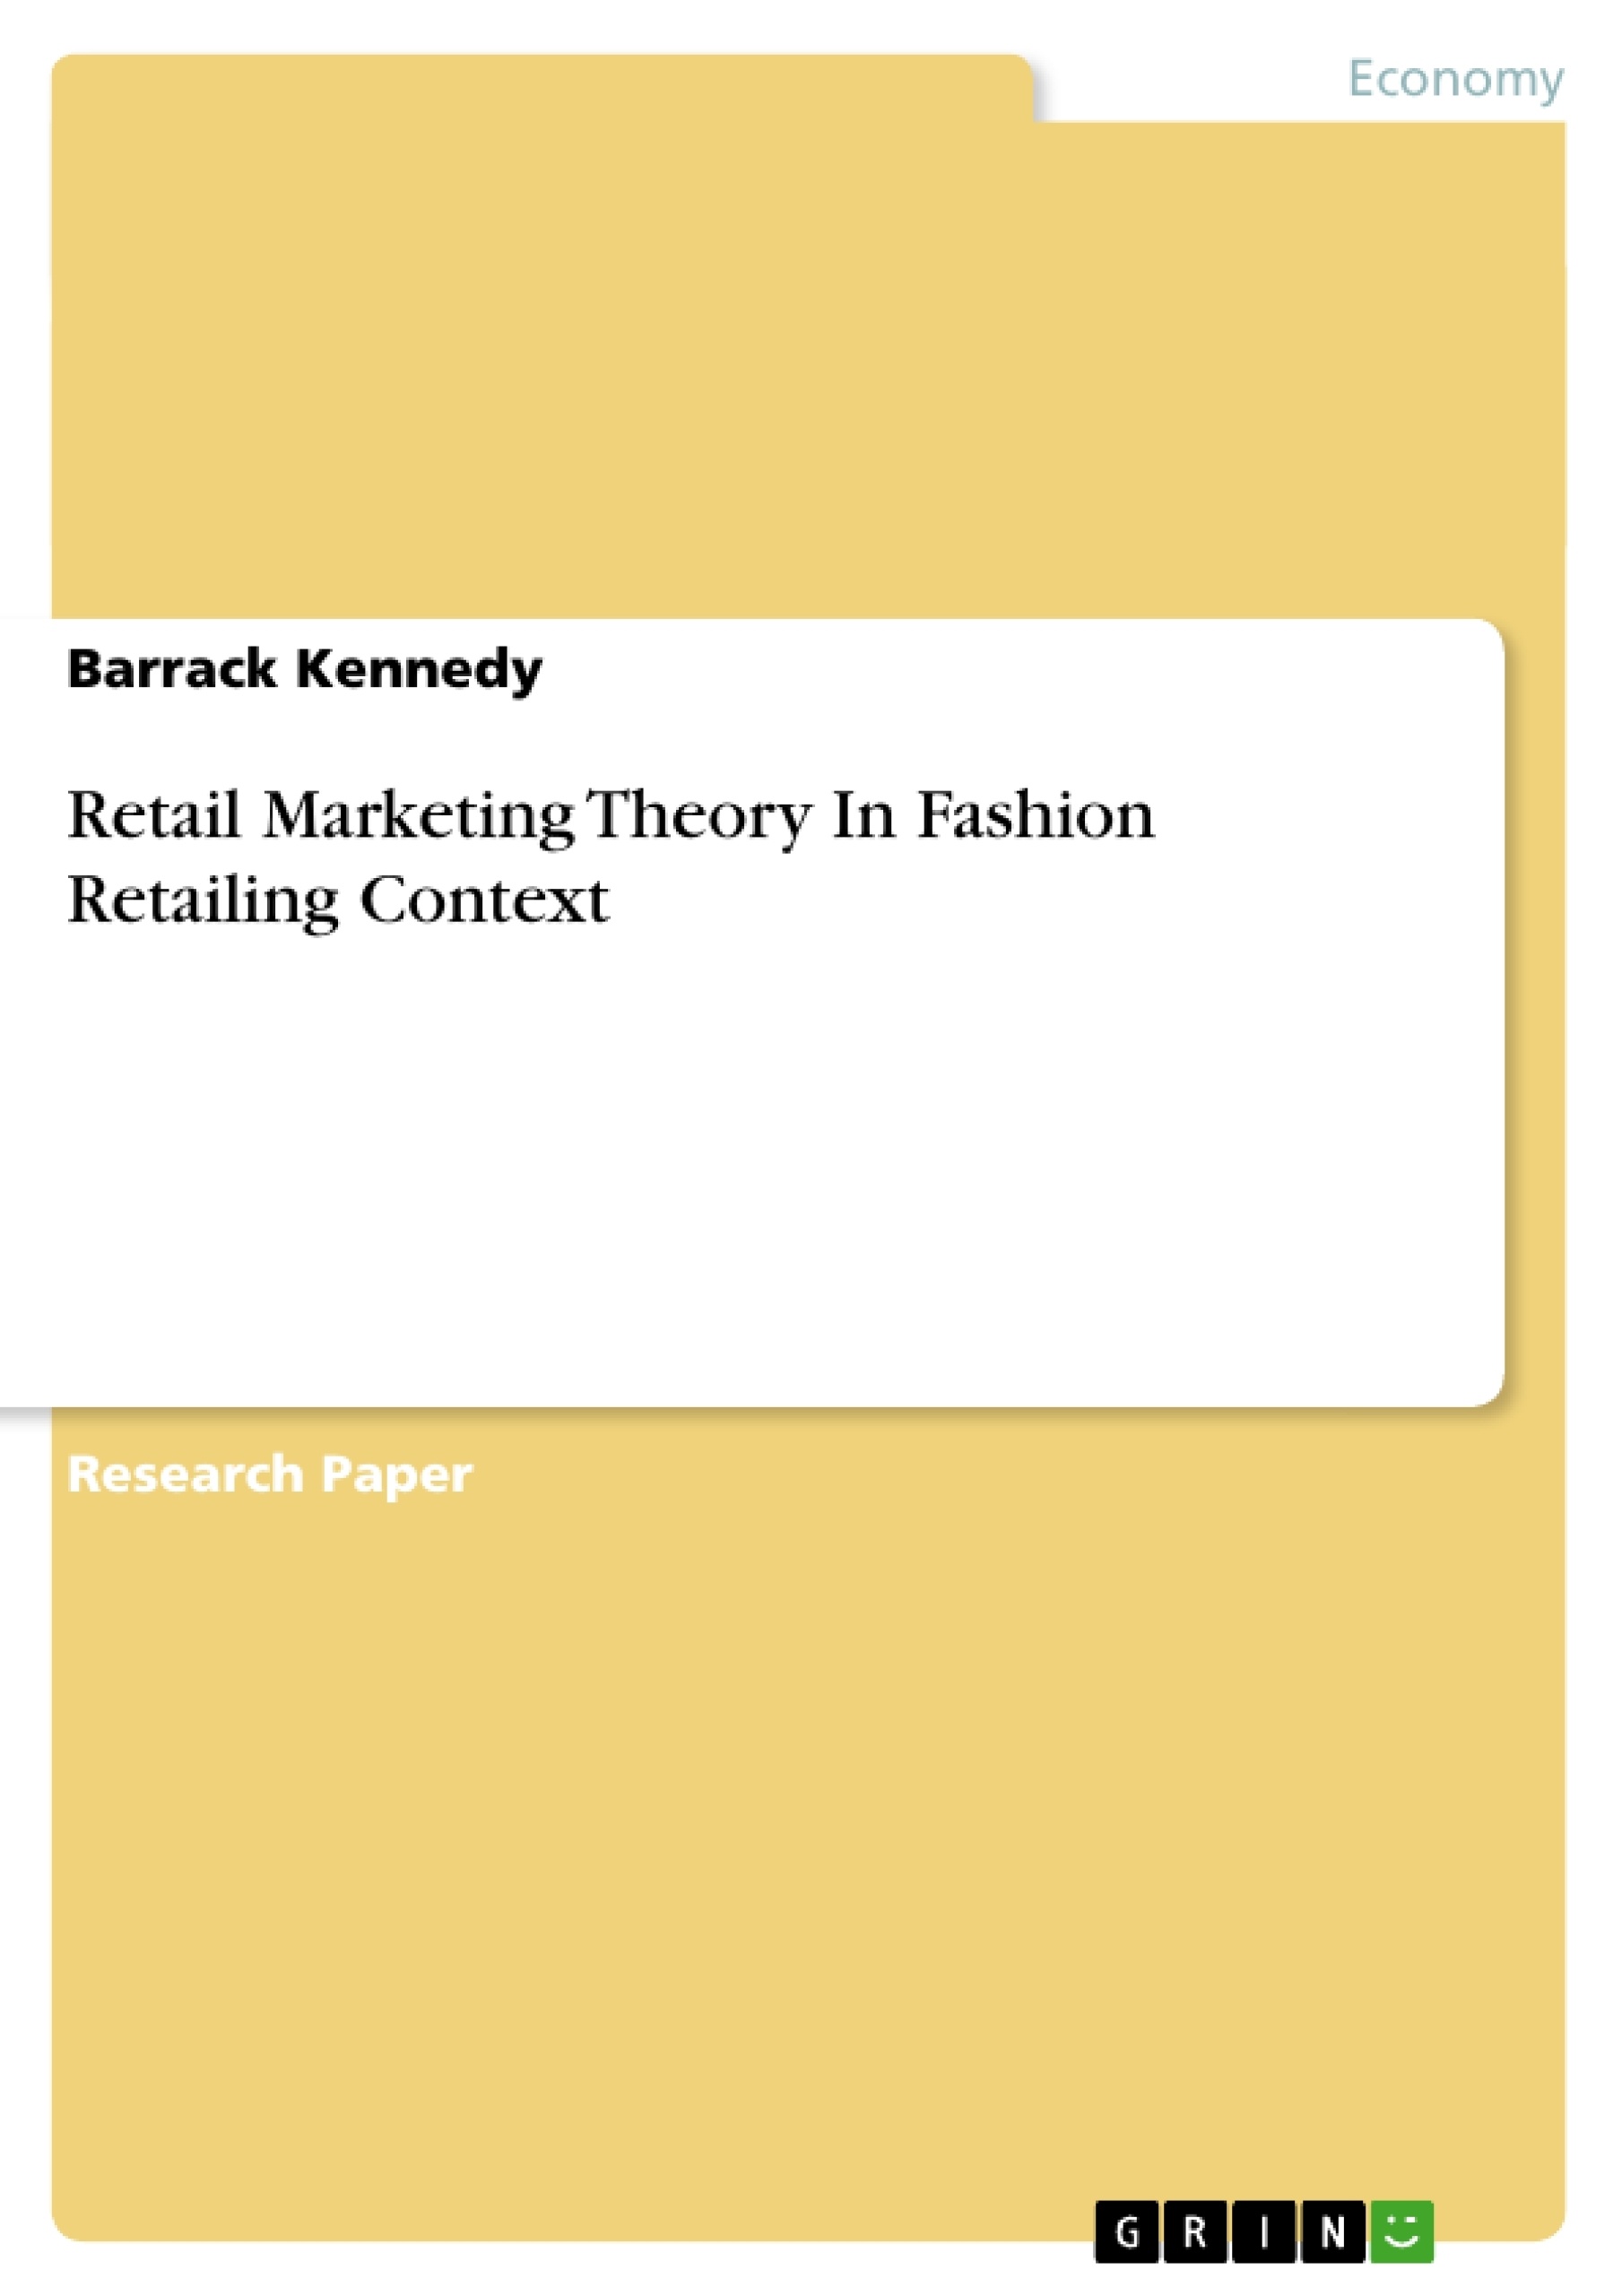 Title: Retail Marketing Theory In Fashion Retailing Context